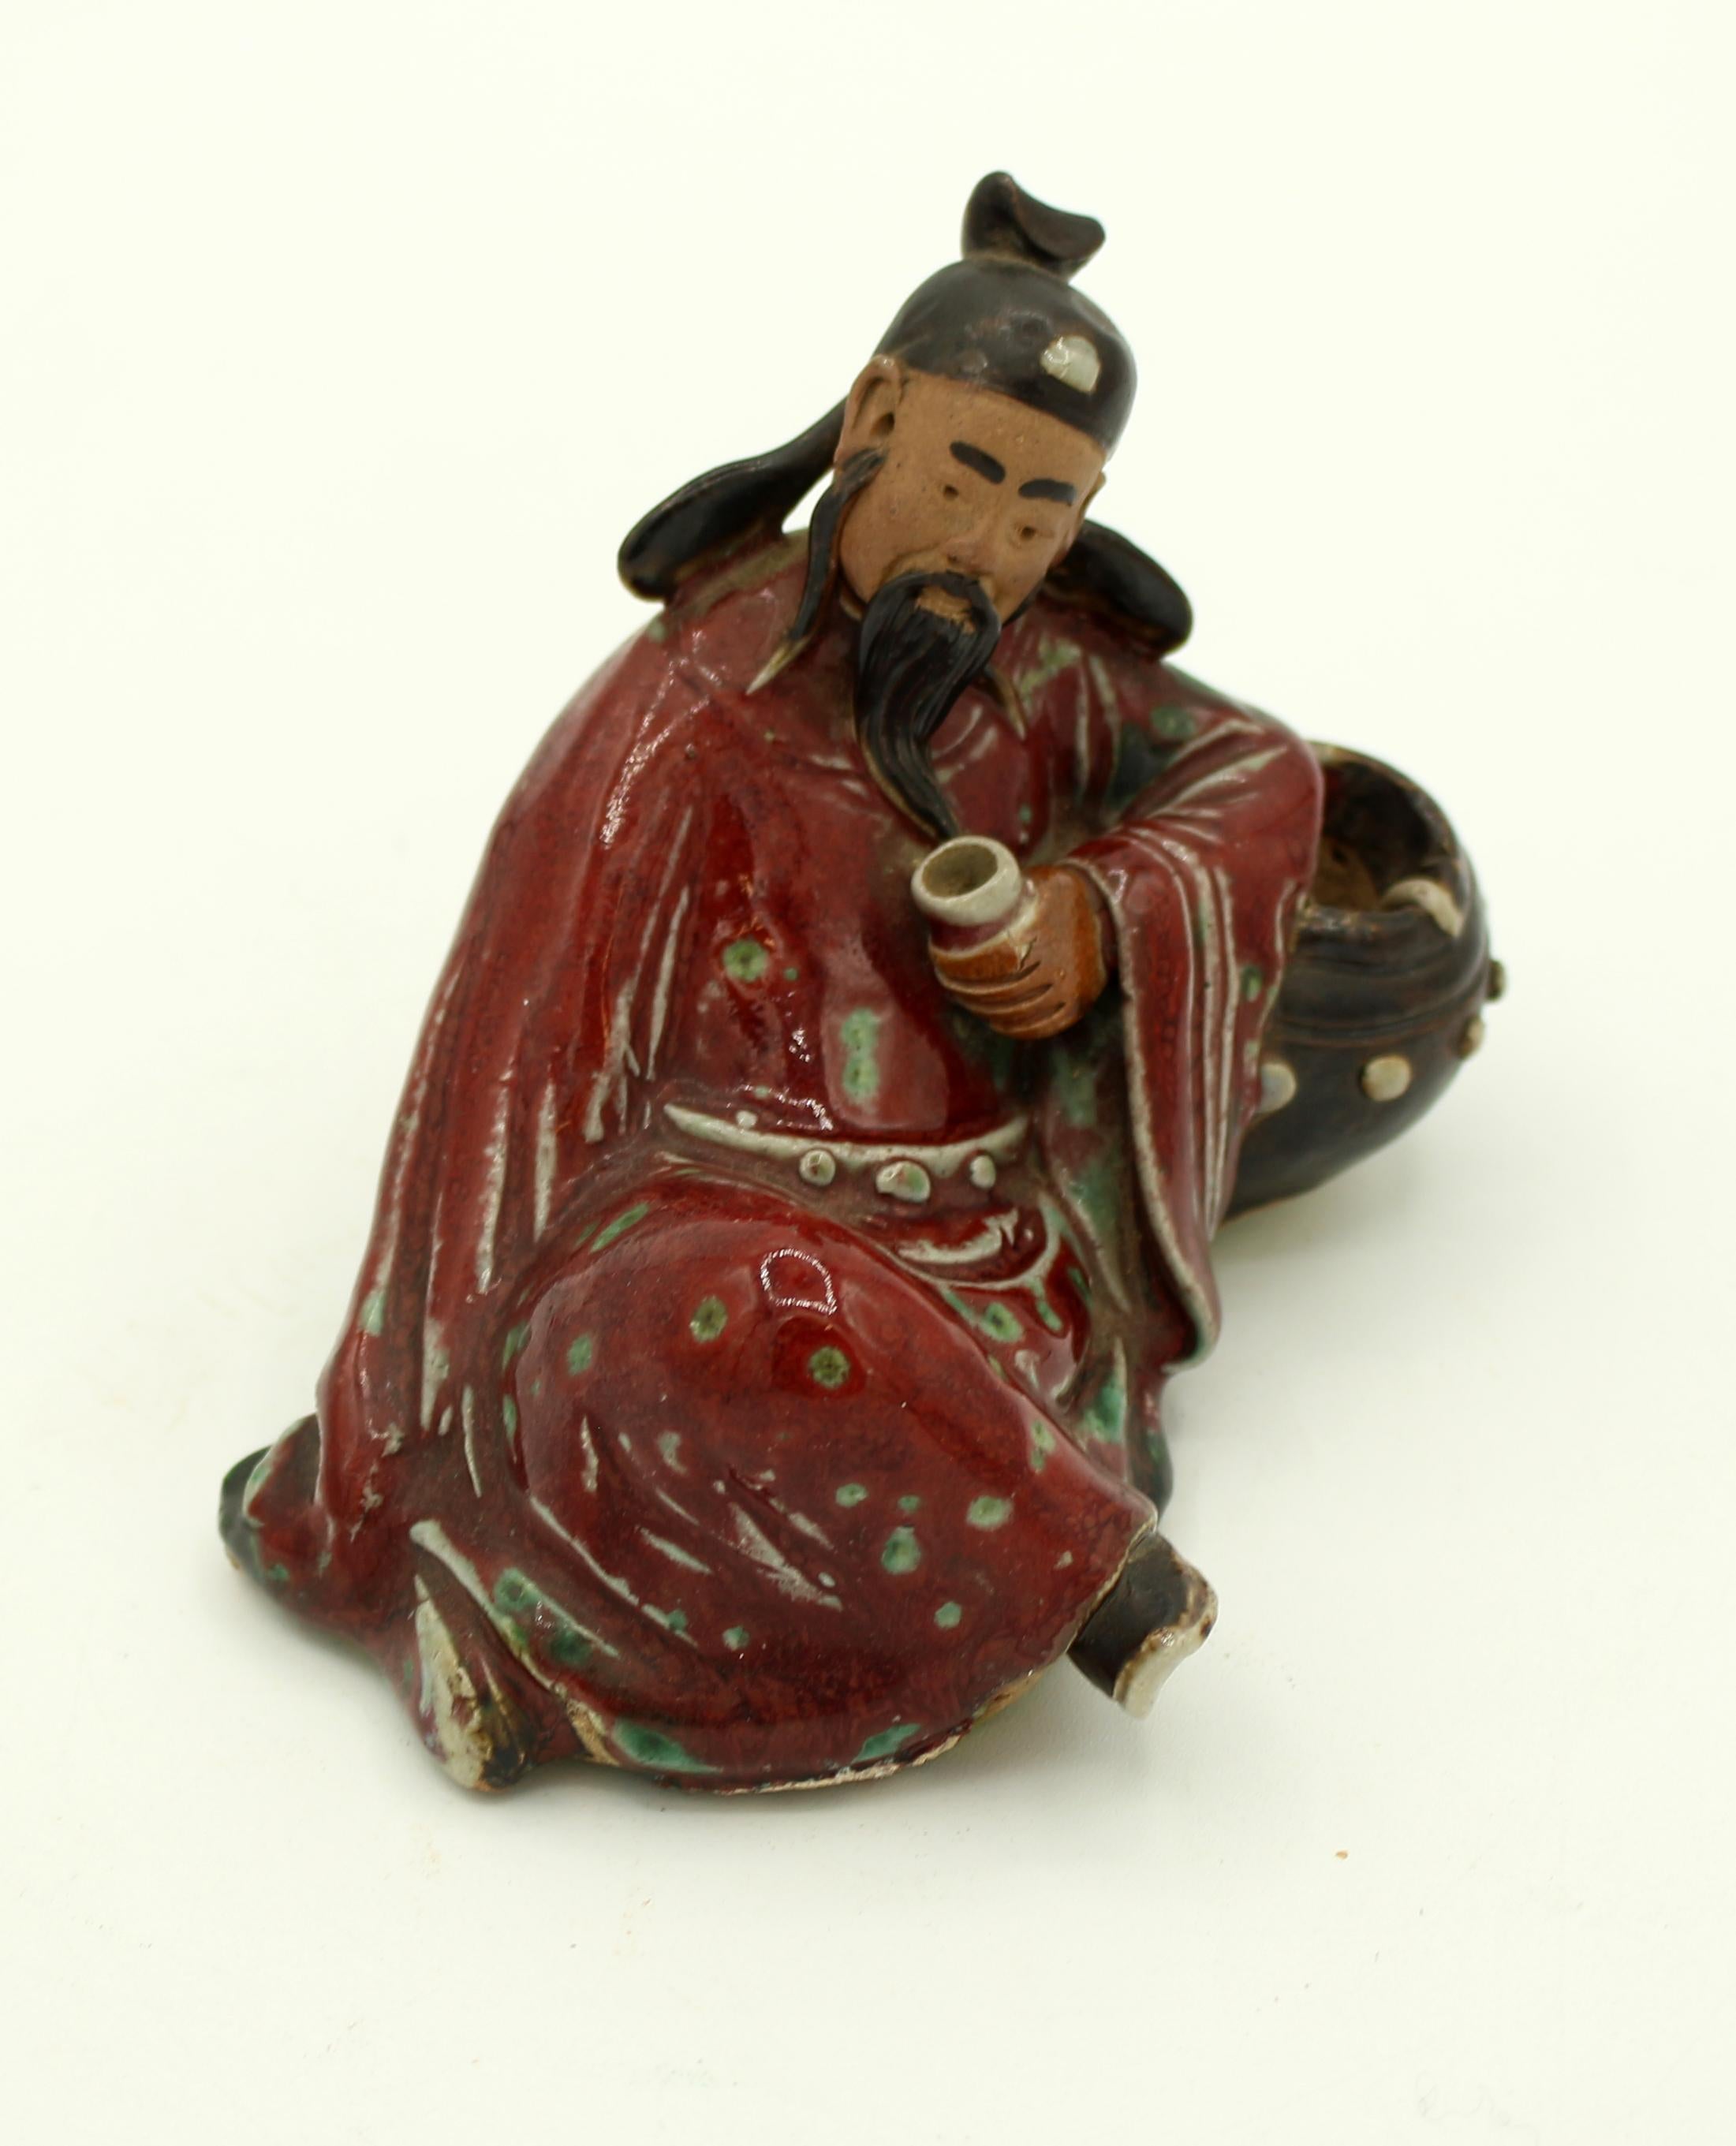 Circa 1920s-30s Shiwan pottery figure of the drunken Tai Pai. Richly glazed pottery. He is slumped on an empty wine cask holding an empty cup. Republic period. Measures: 4 3/4